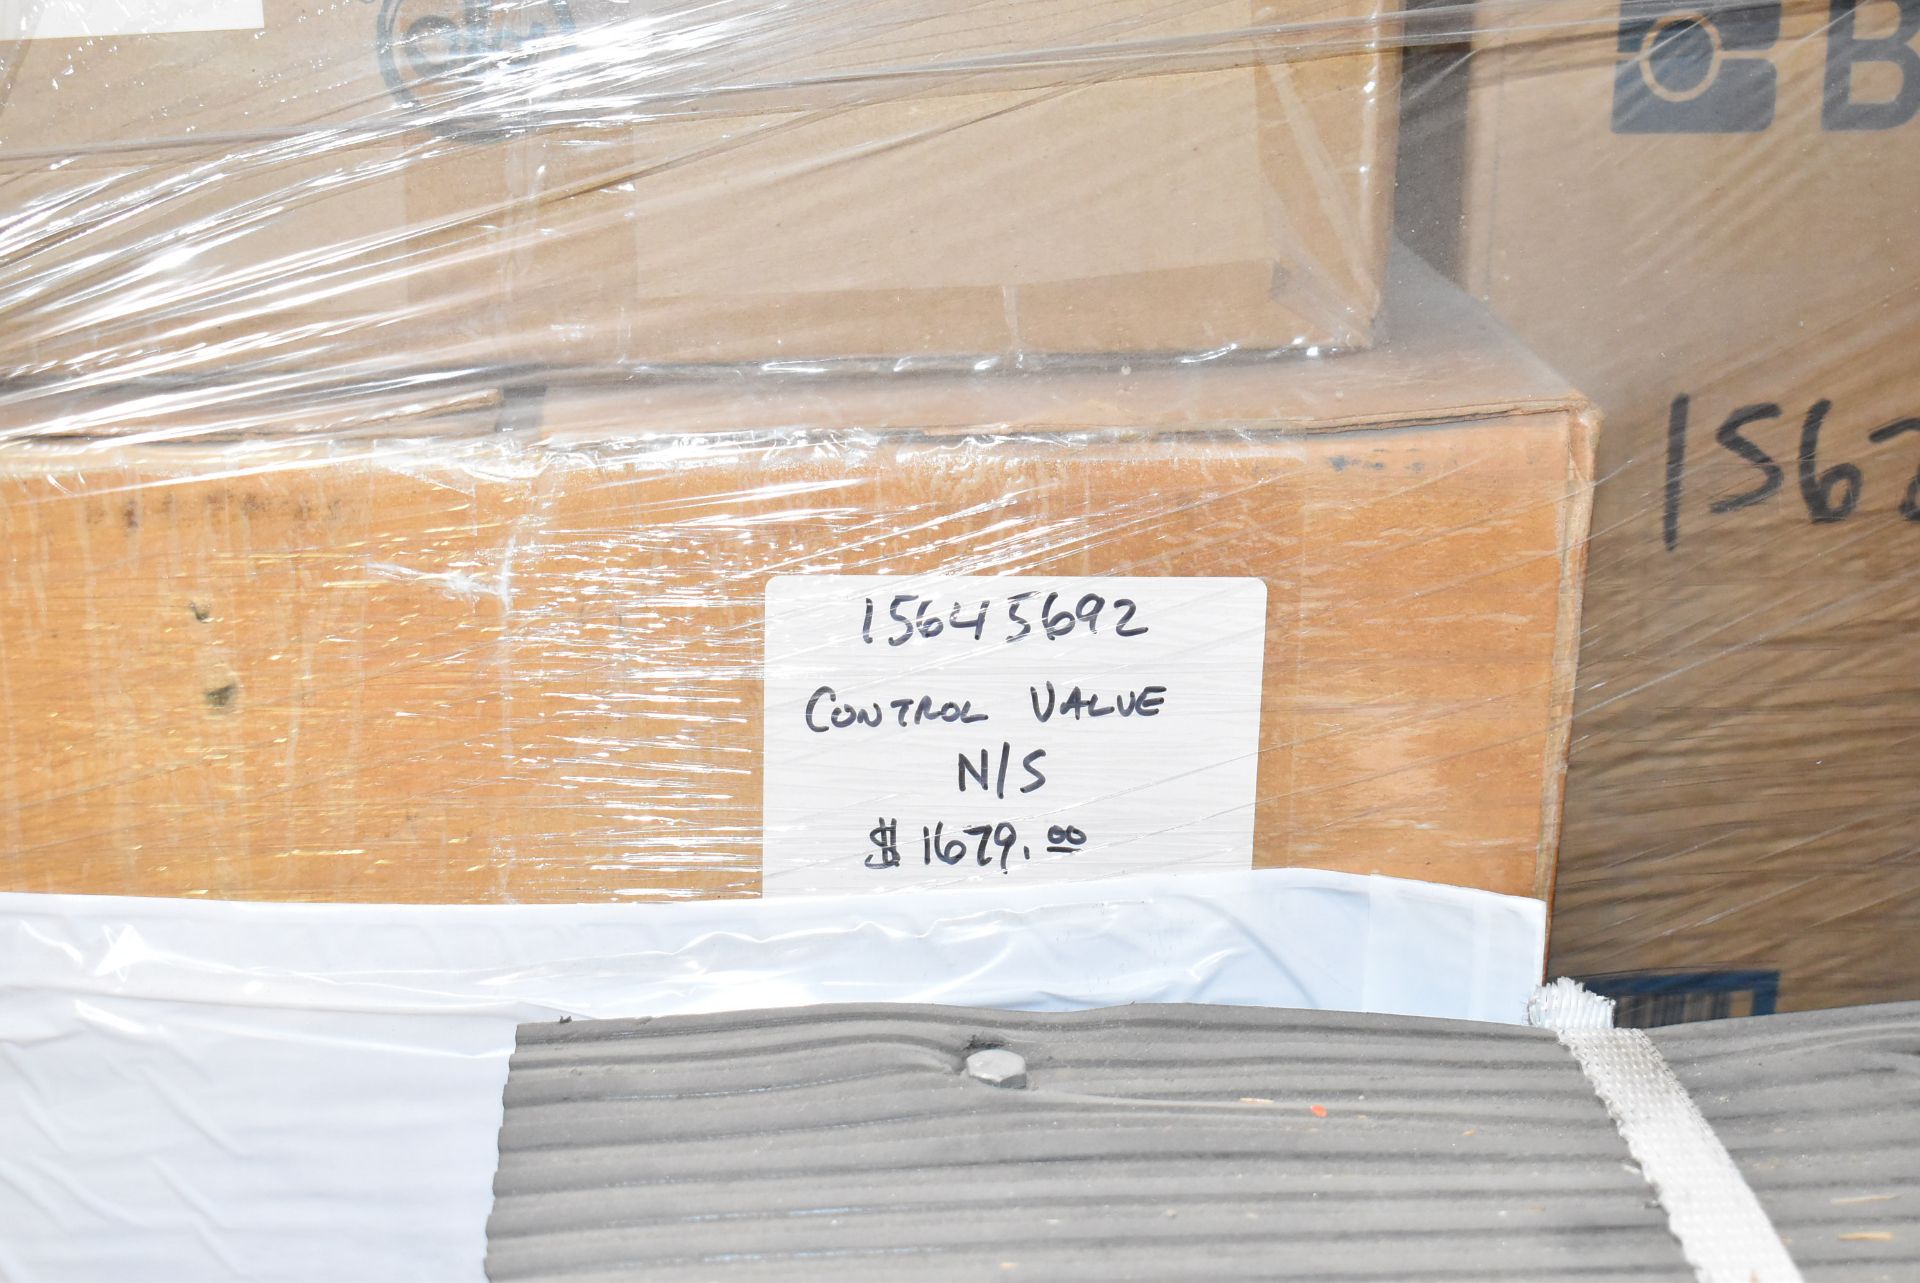 LOT/ PALLET OF SPARE PARTS CONSISTING OF TRANSFORMERS, LAMPS, TEES, MARKERS, BASEBOARD HEATERS, TOOL - Image 6 of 7